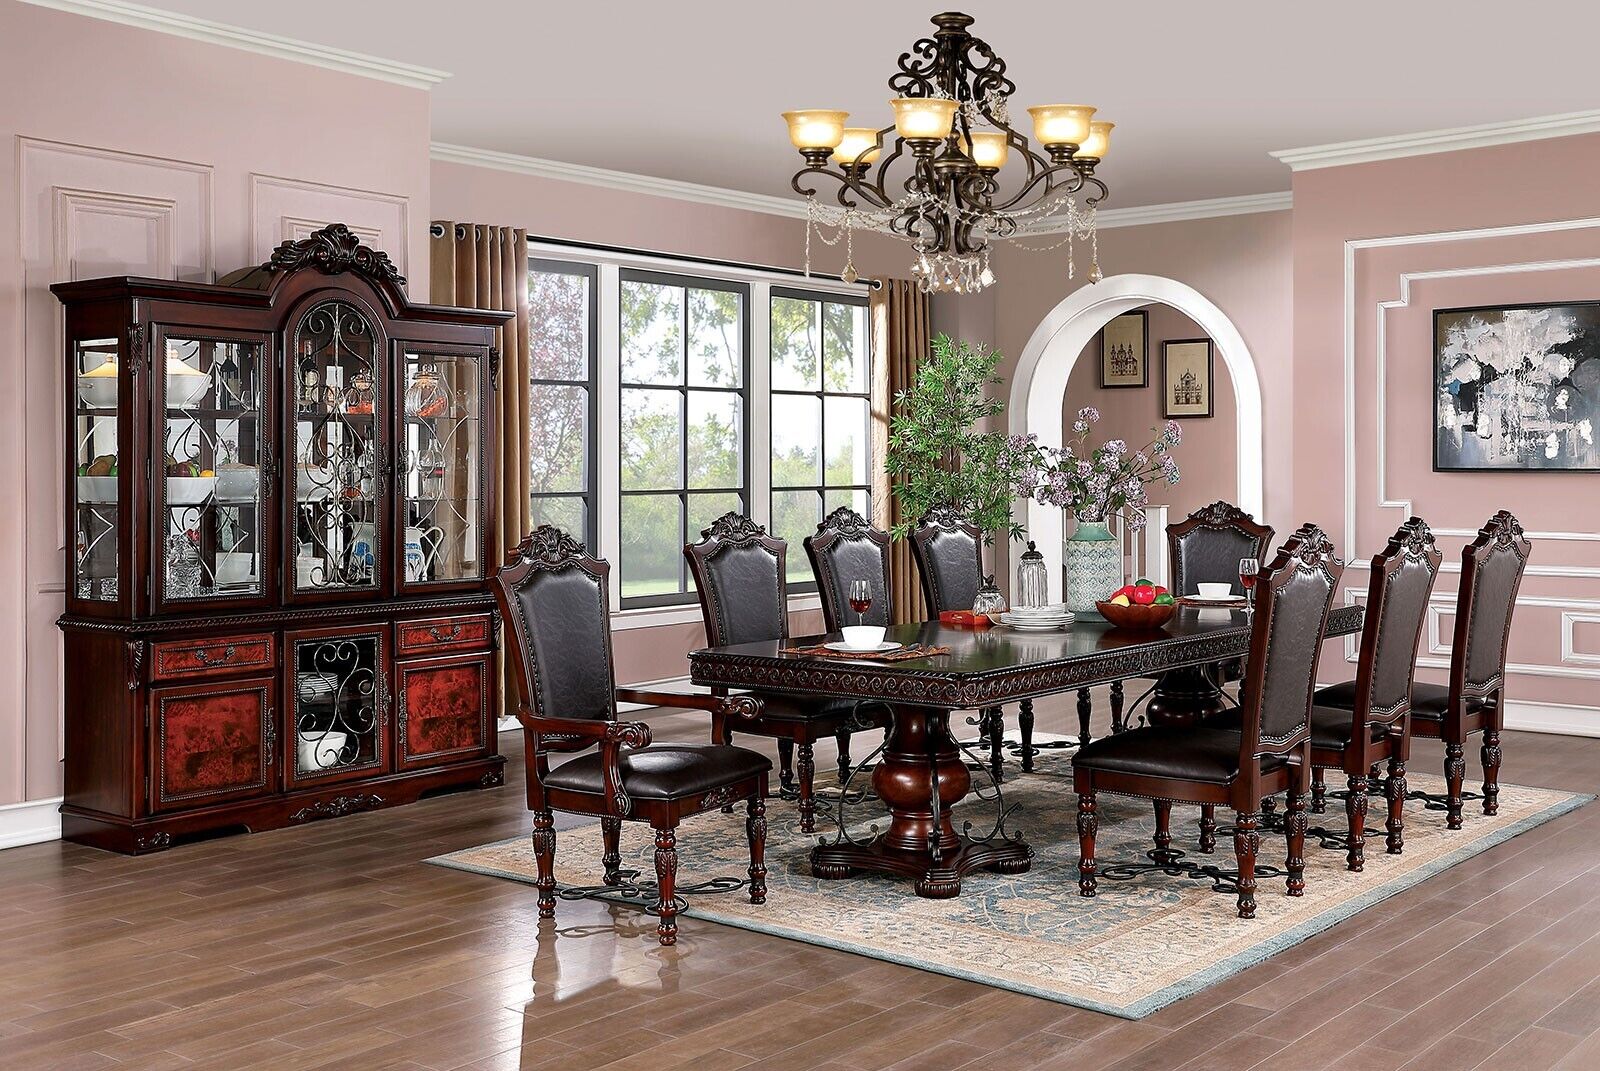 Esofastore Traditional Dining Room Furniture 9pc Set Brown Cherry Dining Table w Leaves 2x Arm Chairs 6x Side Chairs Black Leatherette Seat